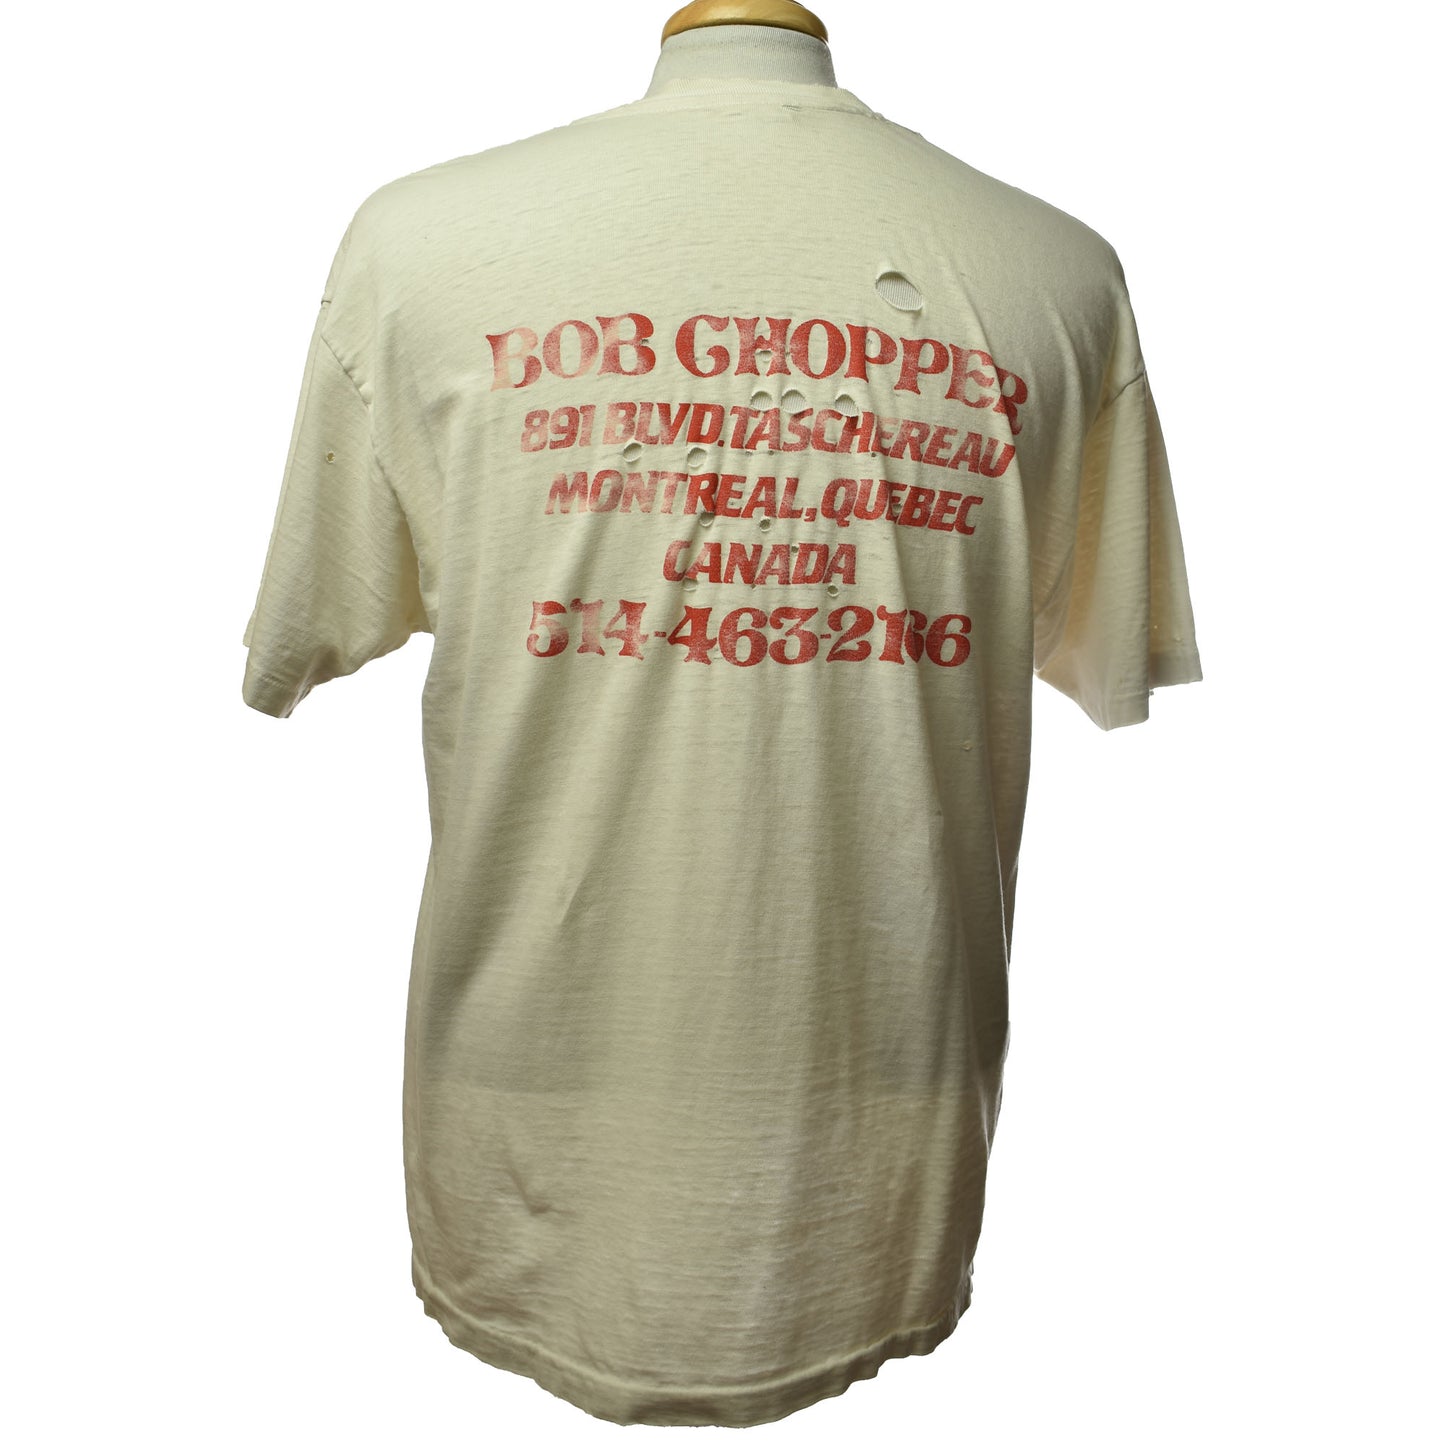 Vintage Single Stitch Thrashed Bob Chopper Mega Performance Motorcycle Graphic Tee Hanes Beefy- T 100% Cotton Made in USA - Size Large